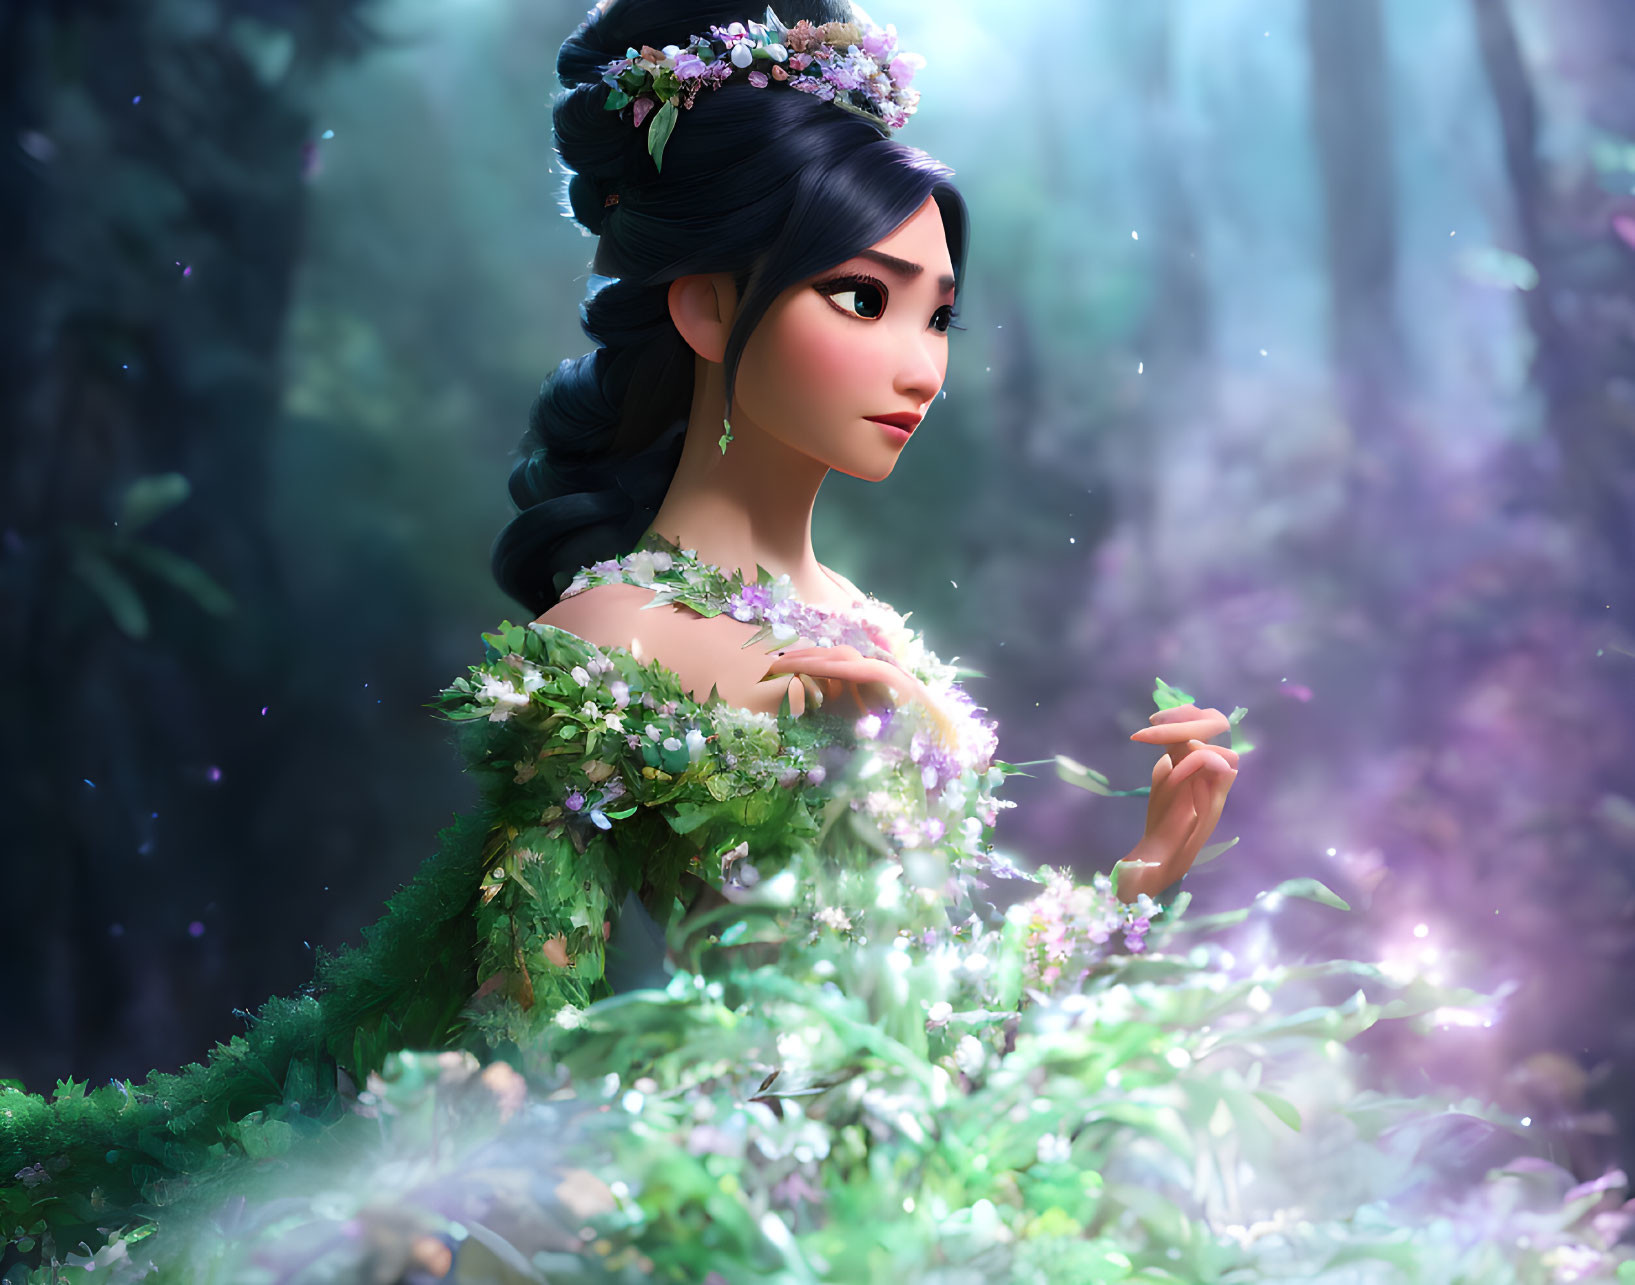 Dark-Haired Animated Character in Green Floral Dress in Mystical Forest